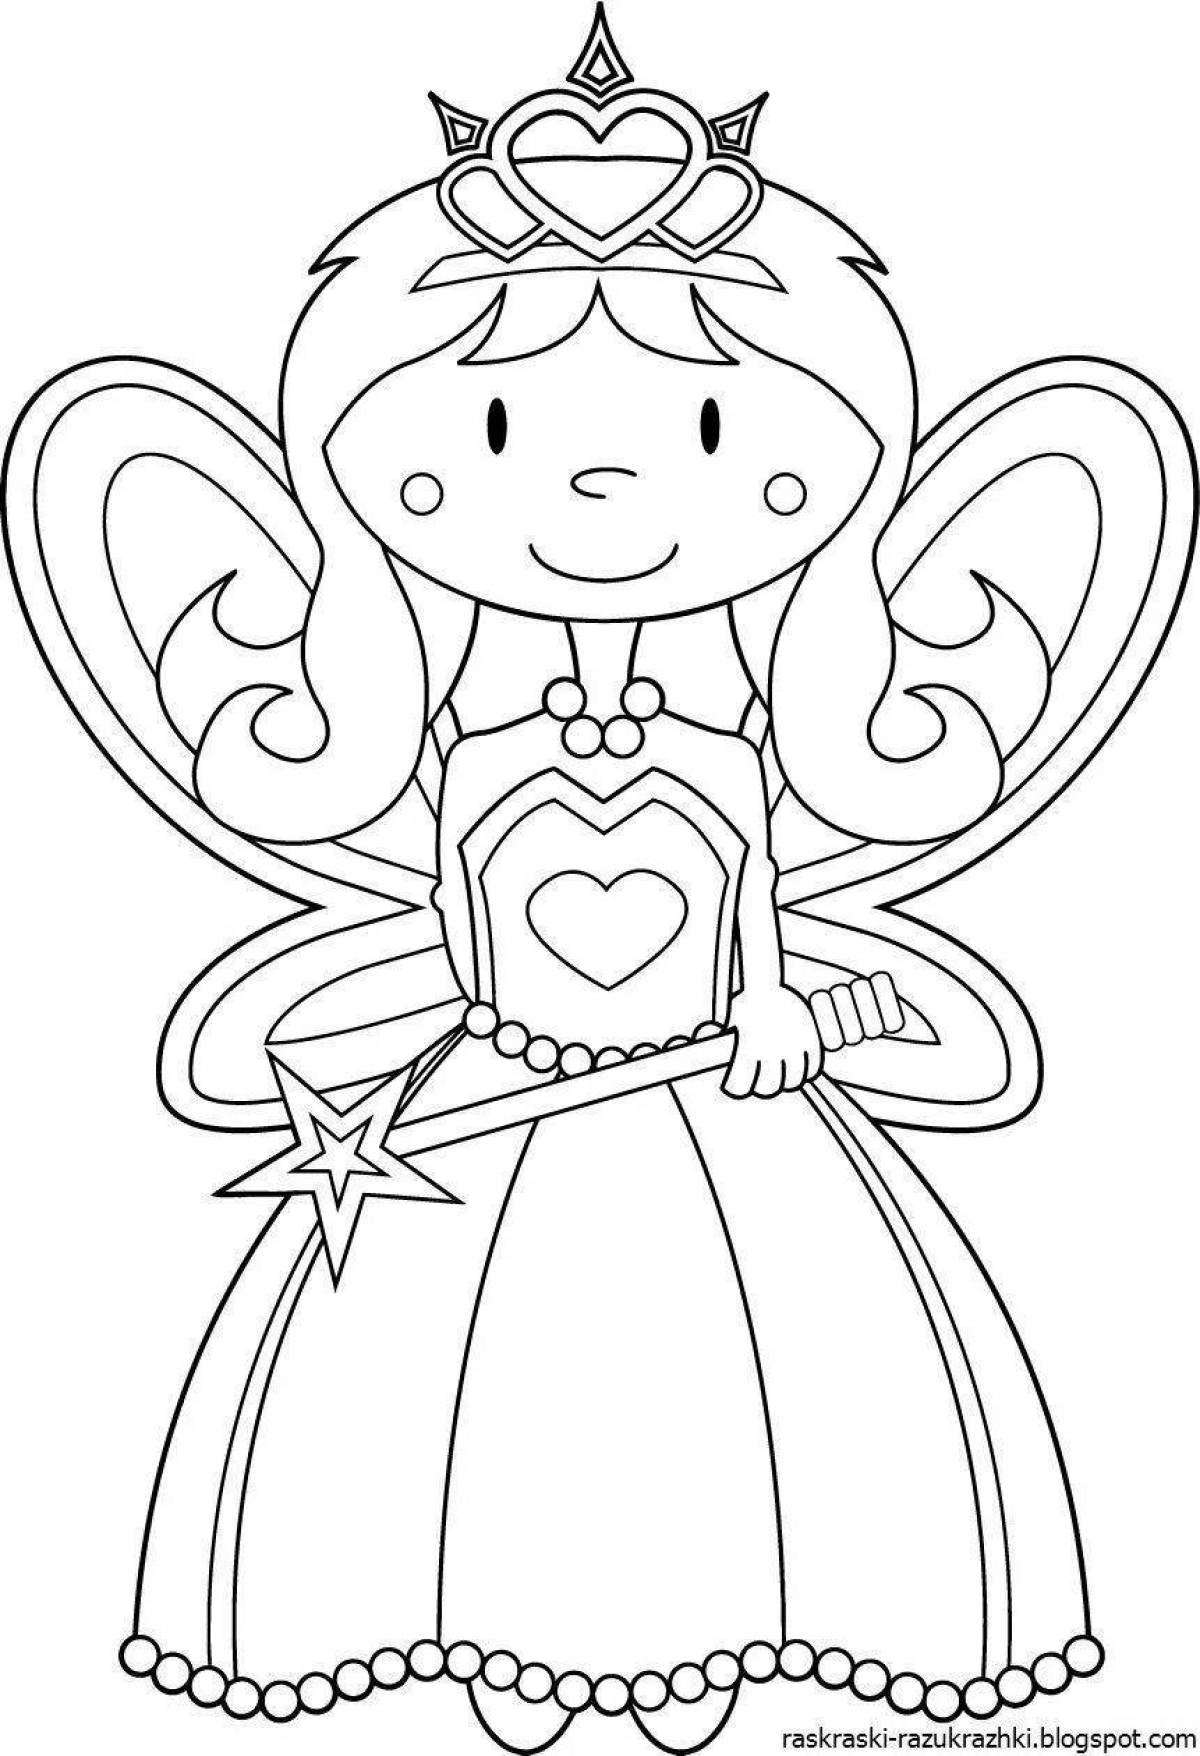 Magic coloring book for girls princesses 3-4 years old